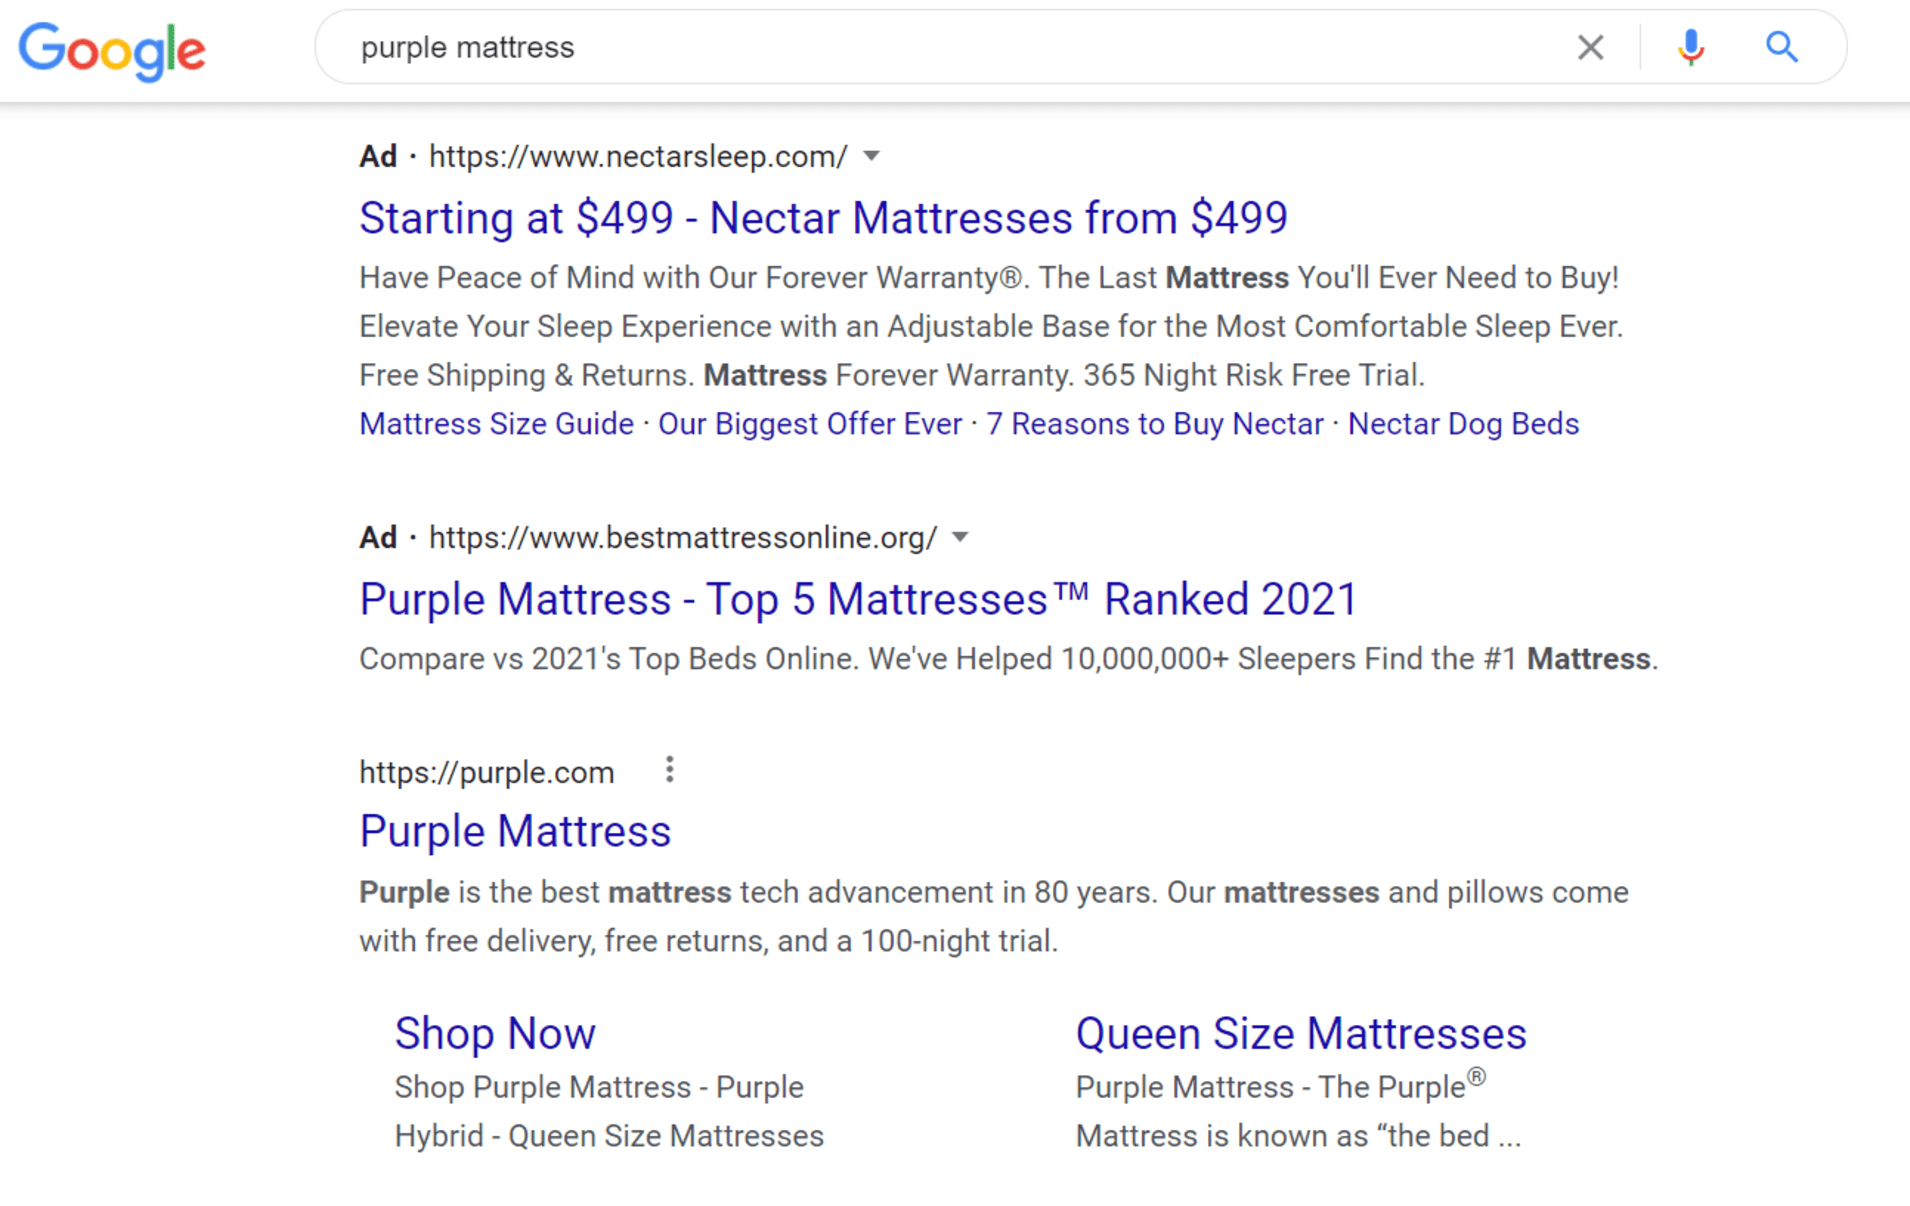 Example of mattress ads on a Google search.